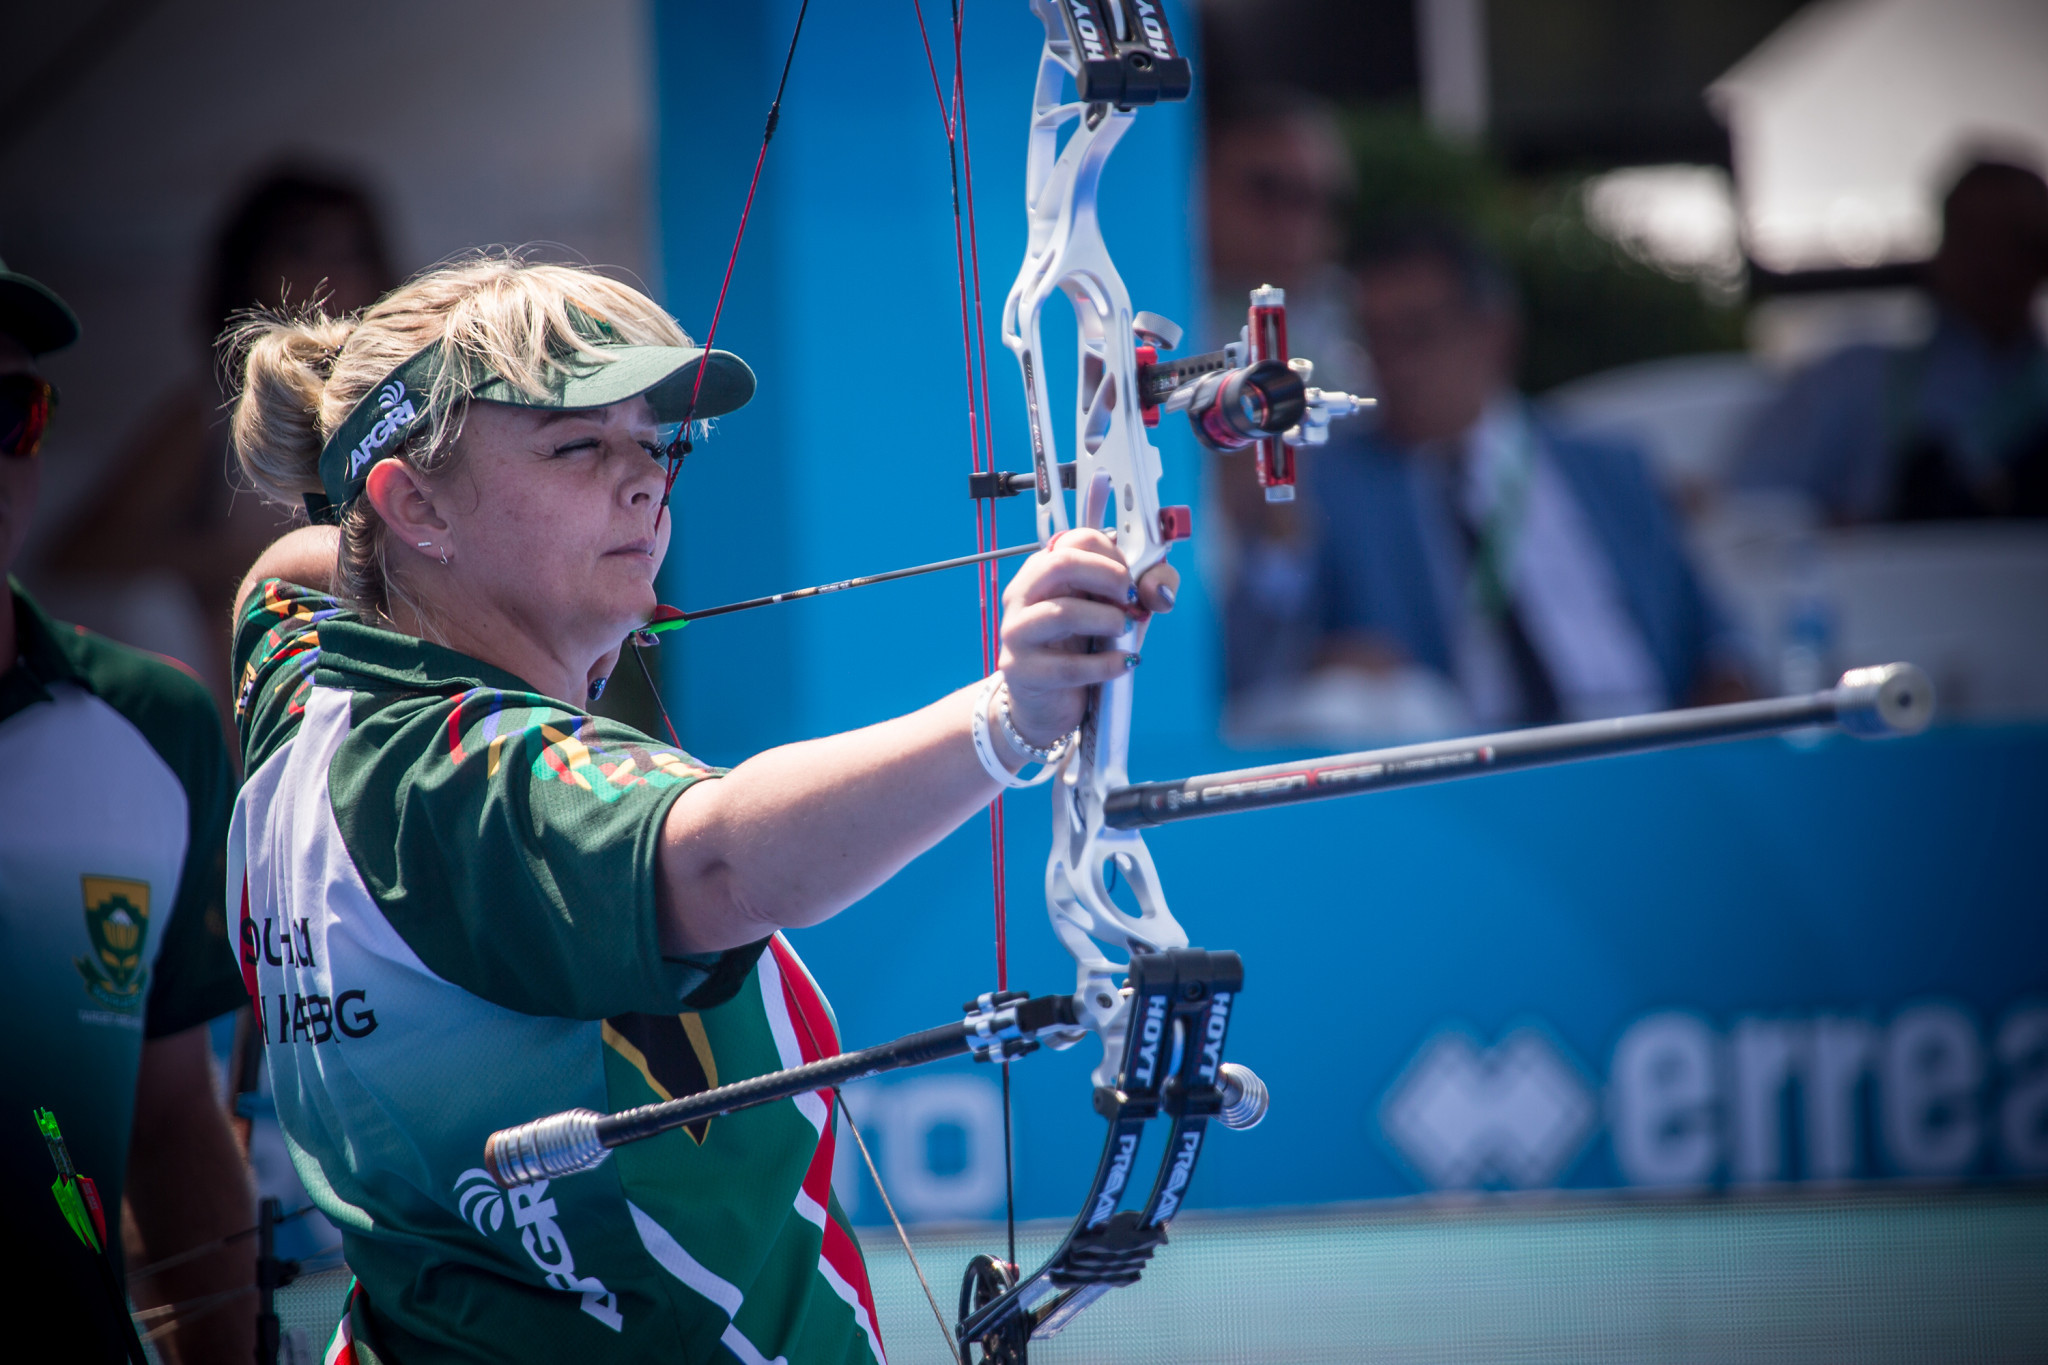 South African archer Jeanine van Kradenburg was taken away from her competition on Friday (July 8) in an ambulance after suffering with heat exhaustion ©Getty Images